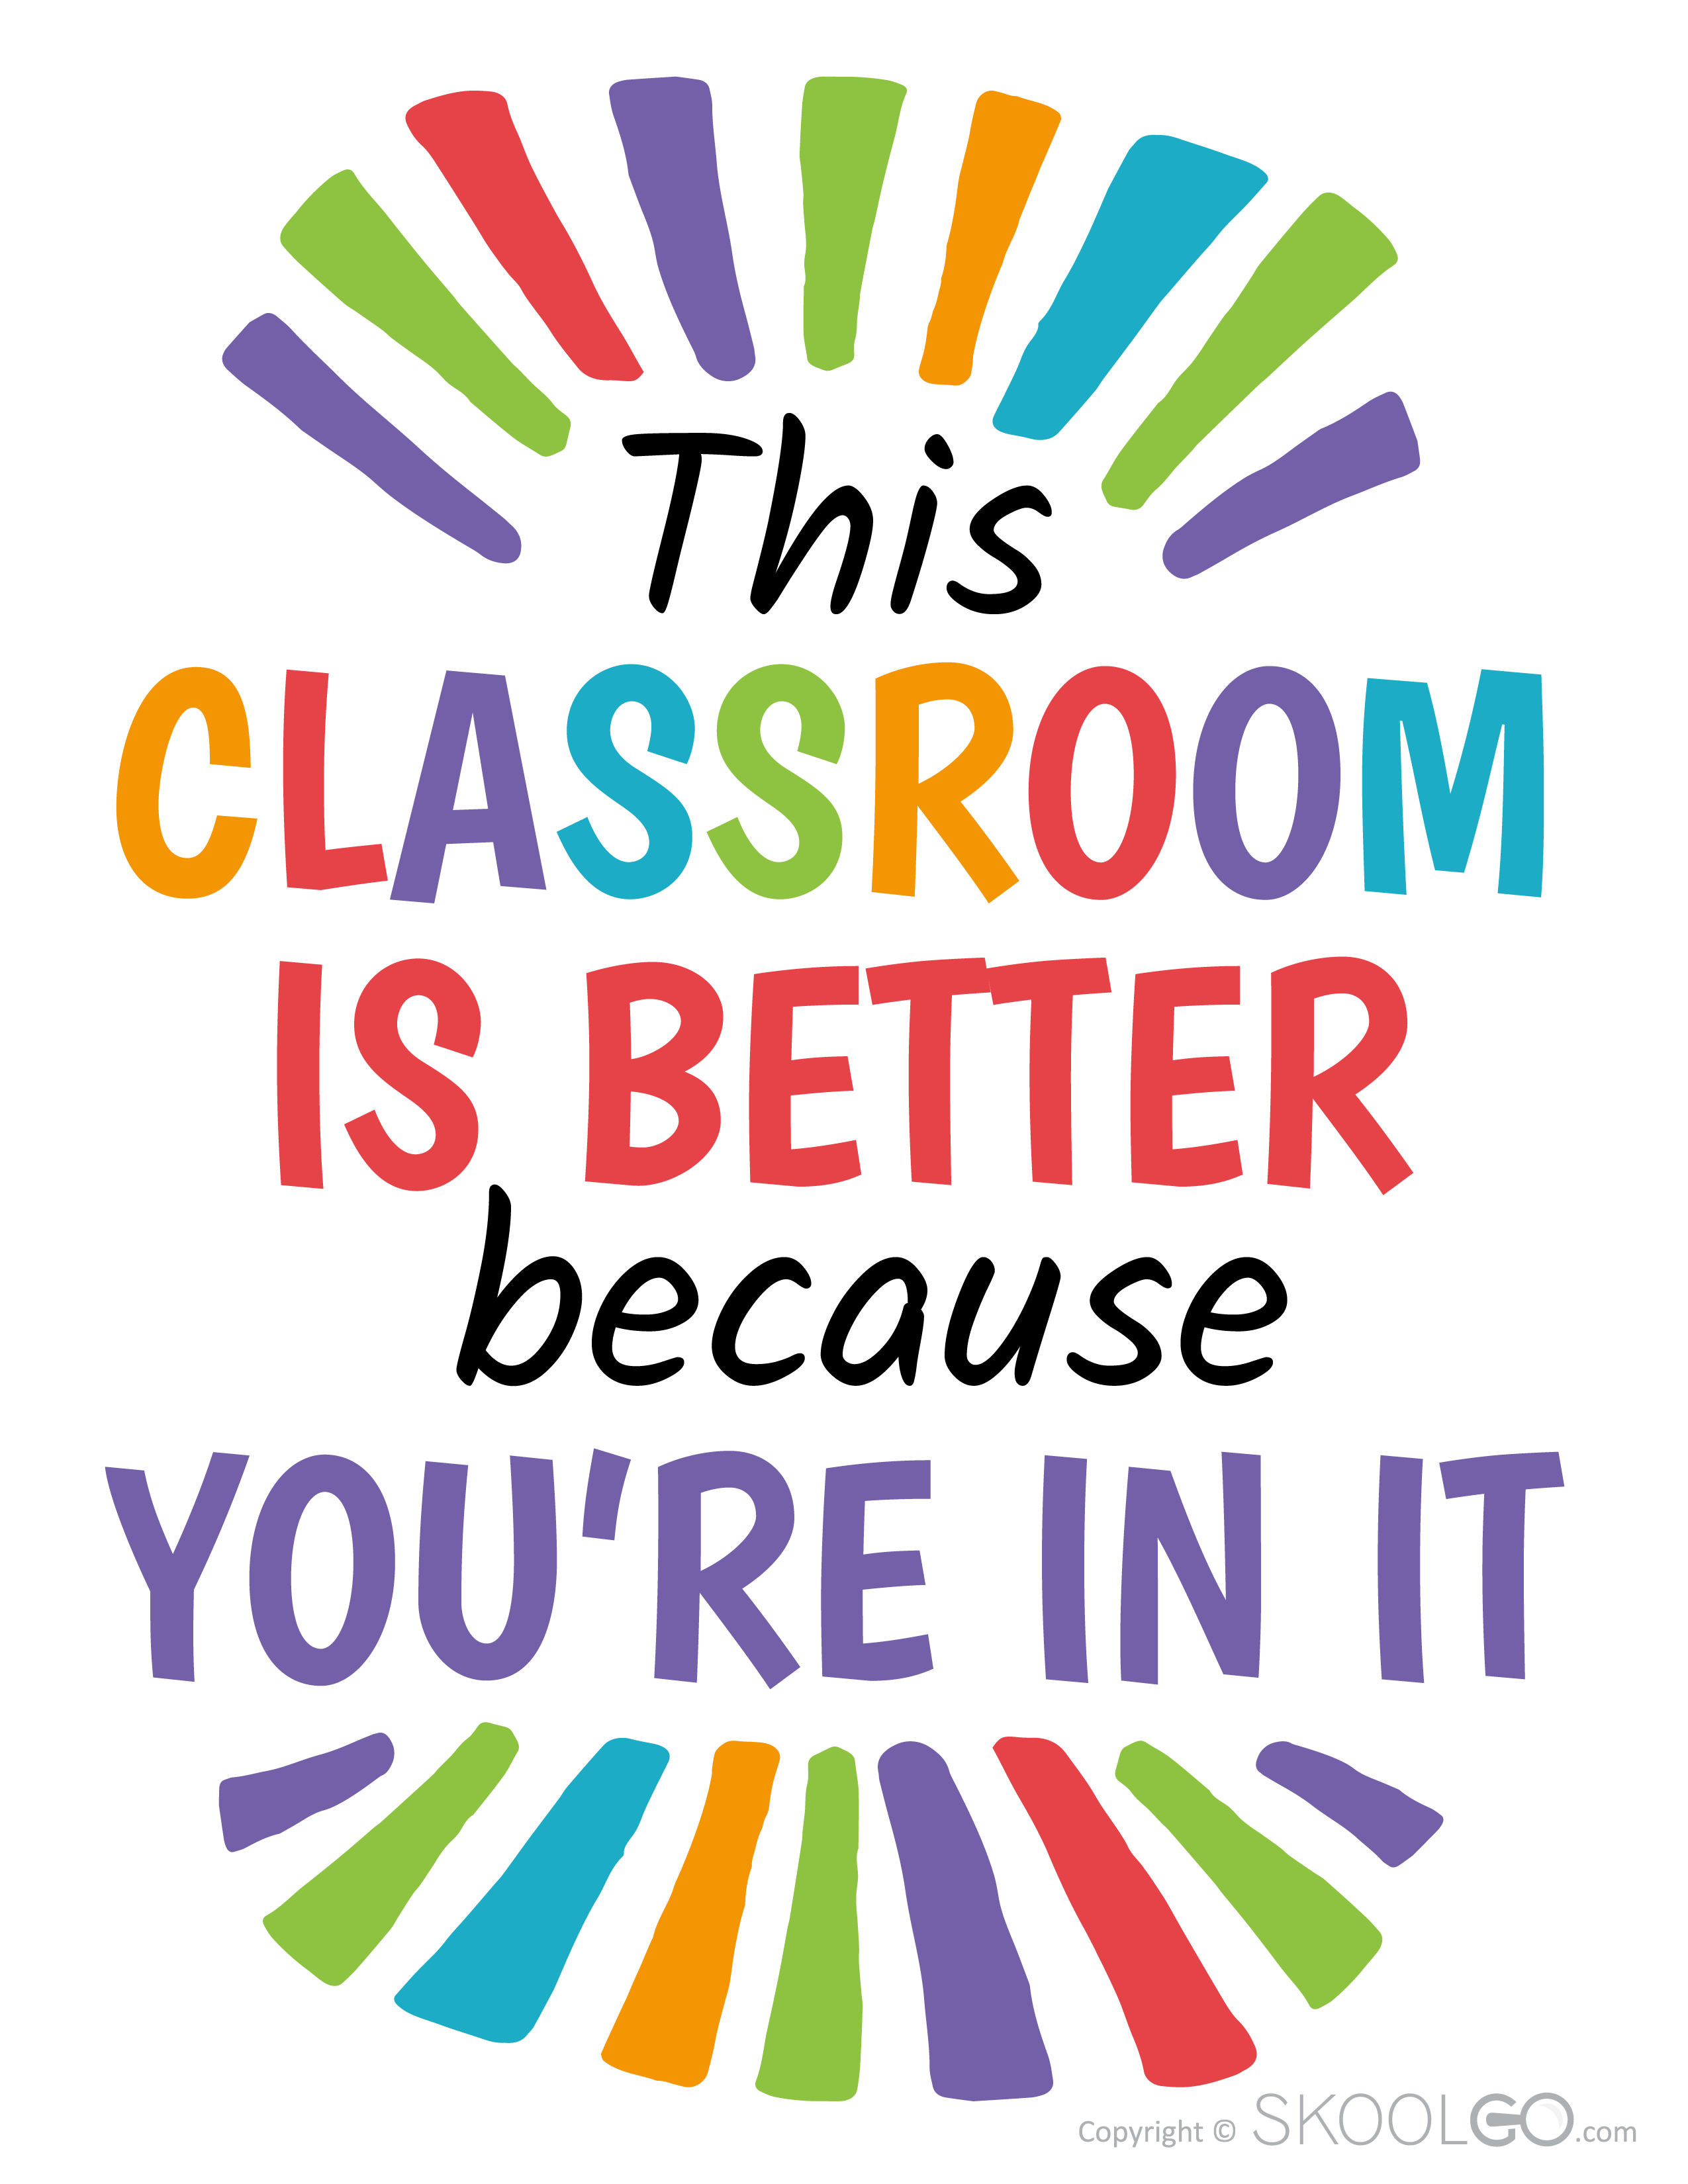 This Classroom Is Better Because You Are In It - Free Poster